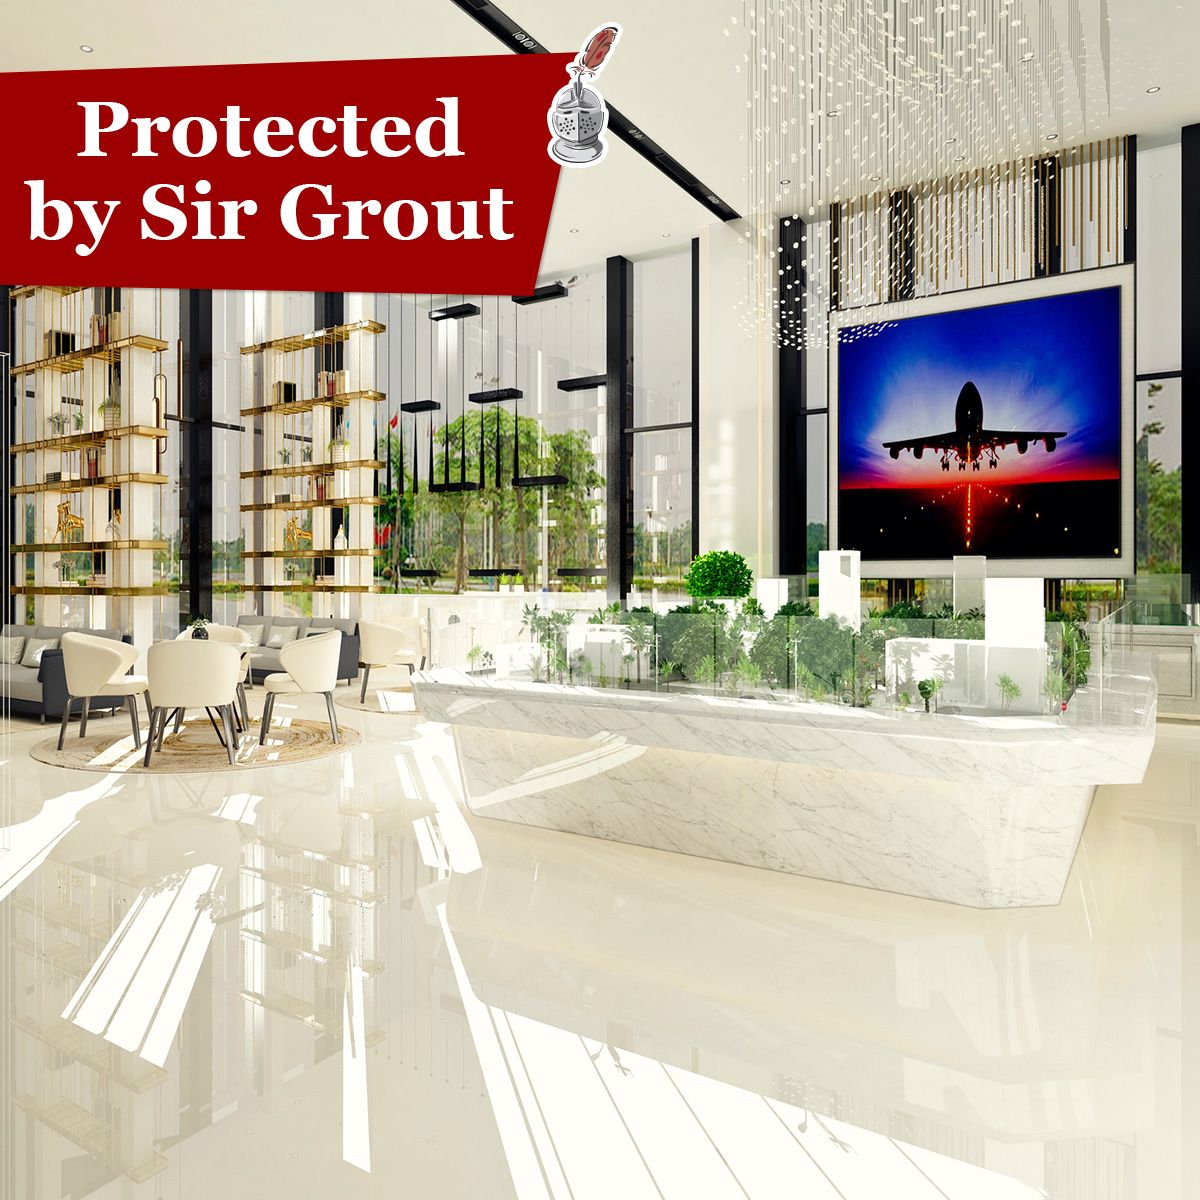 Protected by Sir Grout